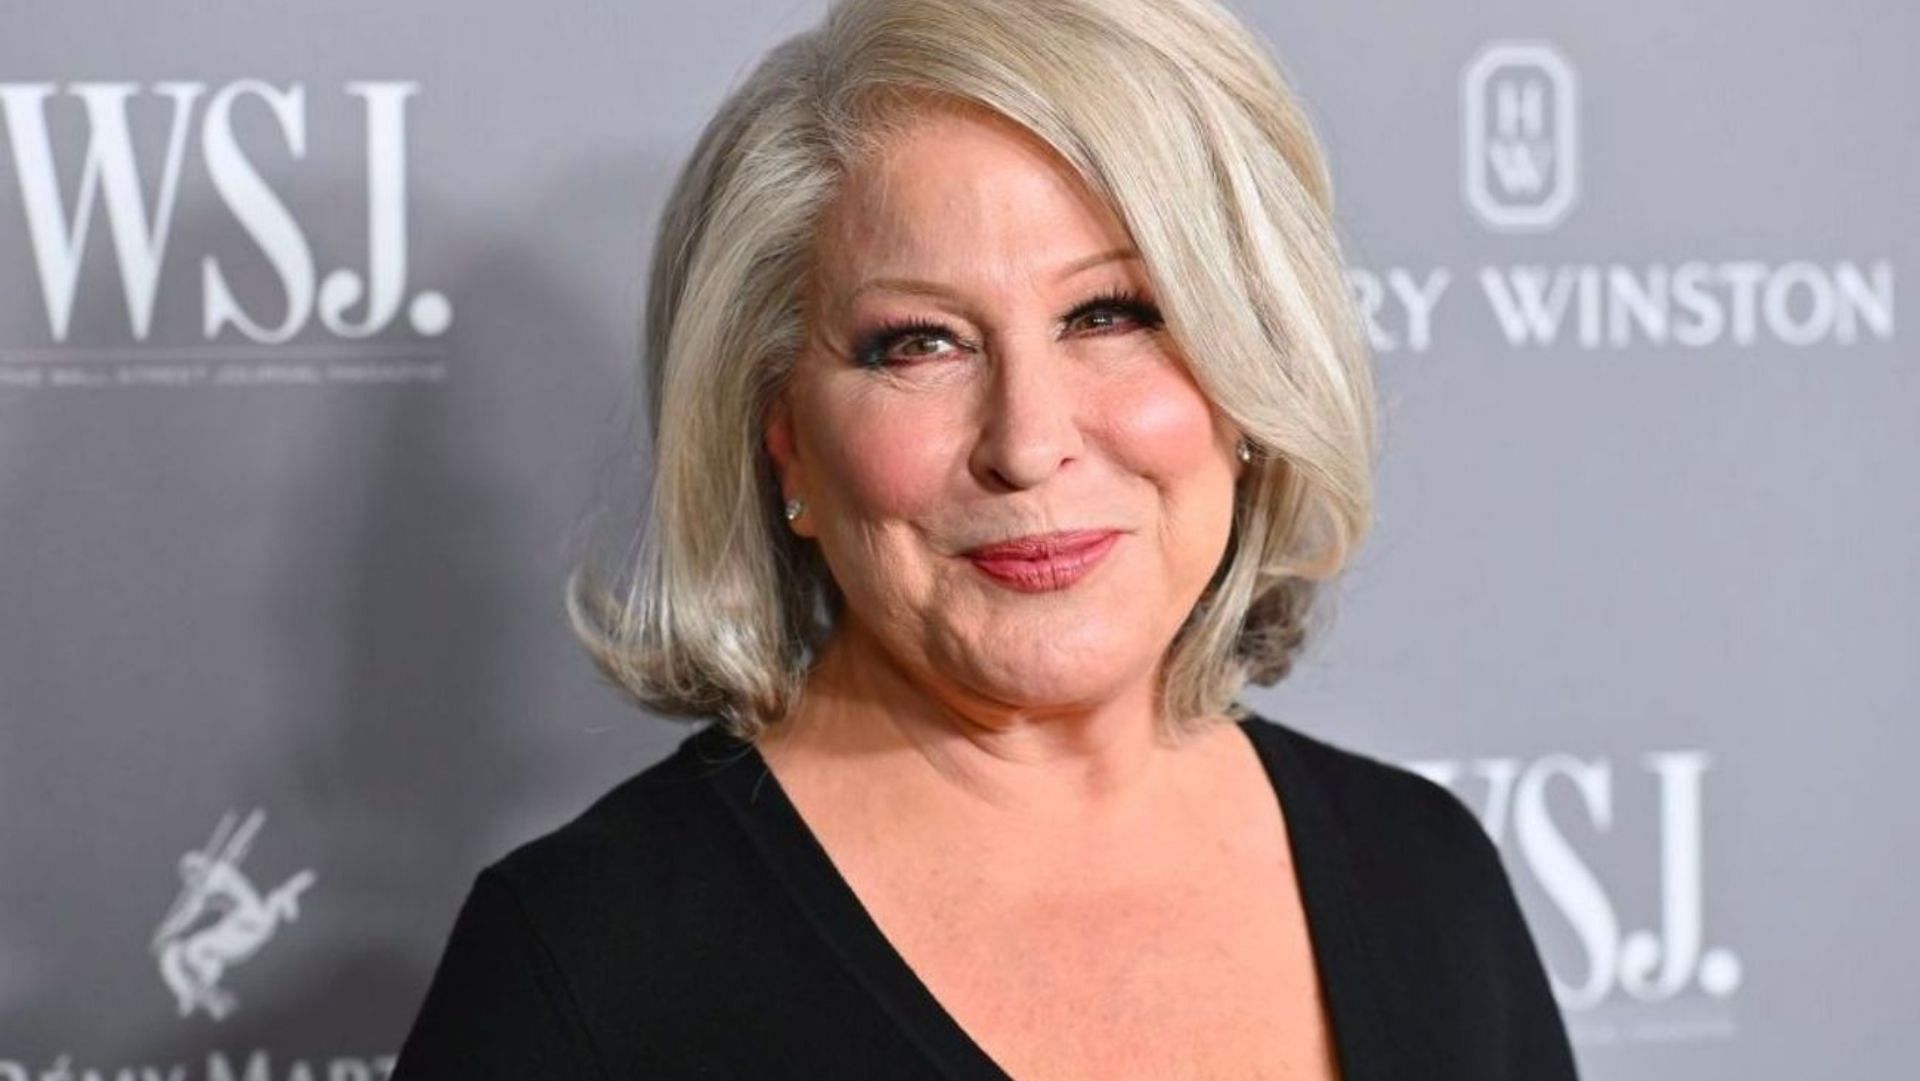 Bette Midler has been called out on social media for not being inclusive of transgender and non-binary people in her latest tweet on abortion rights. (Image via Getty Images)